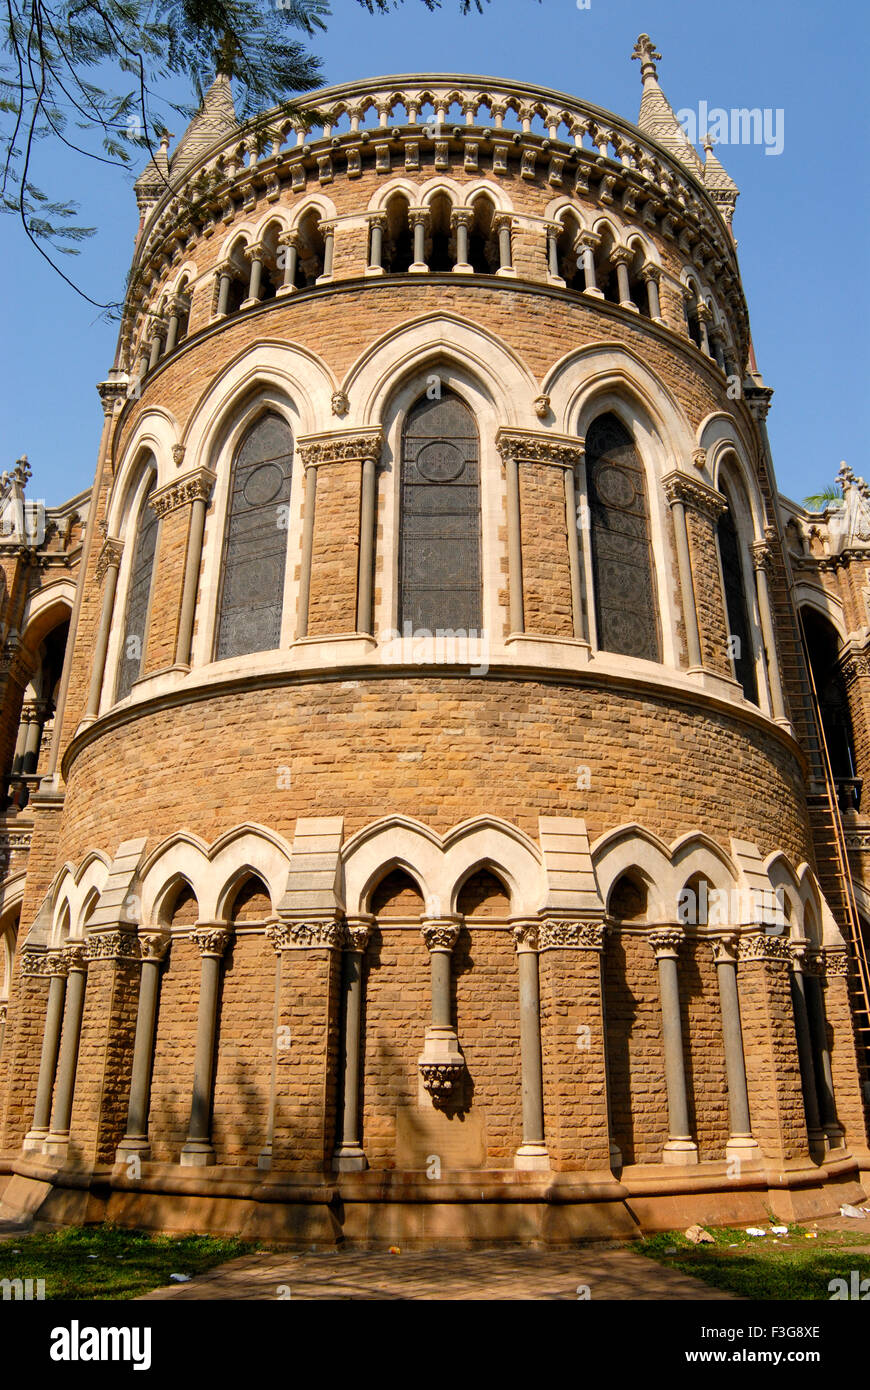 The Covasji Jehangir Convocation Hall ; heritage building built by George Gilbert Scott in 1874 ;Fort ; Bombay Mumbai Stock Photo